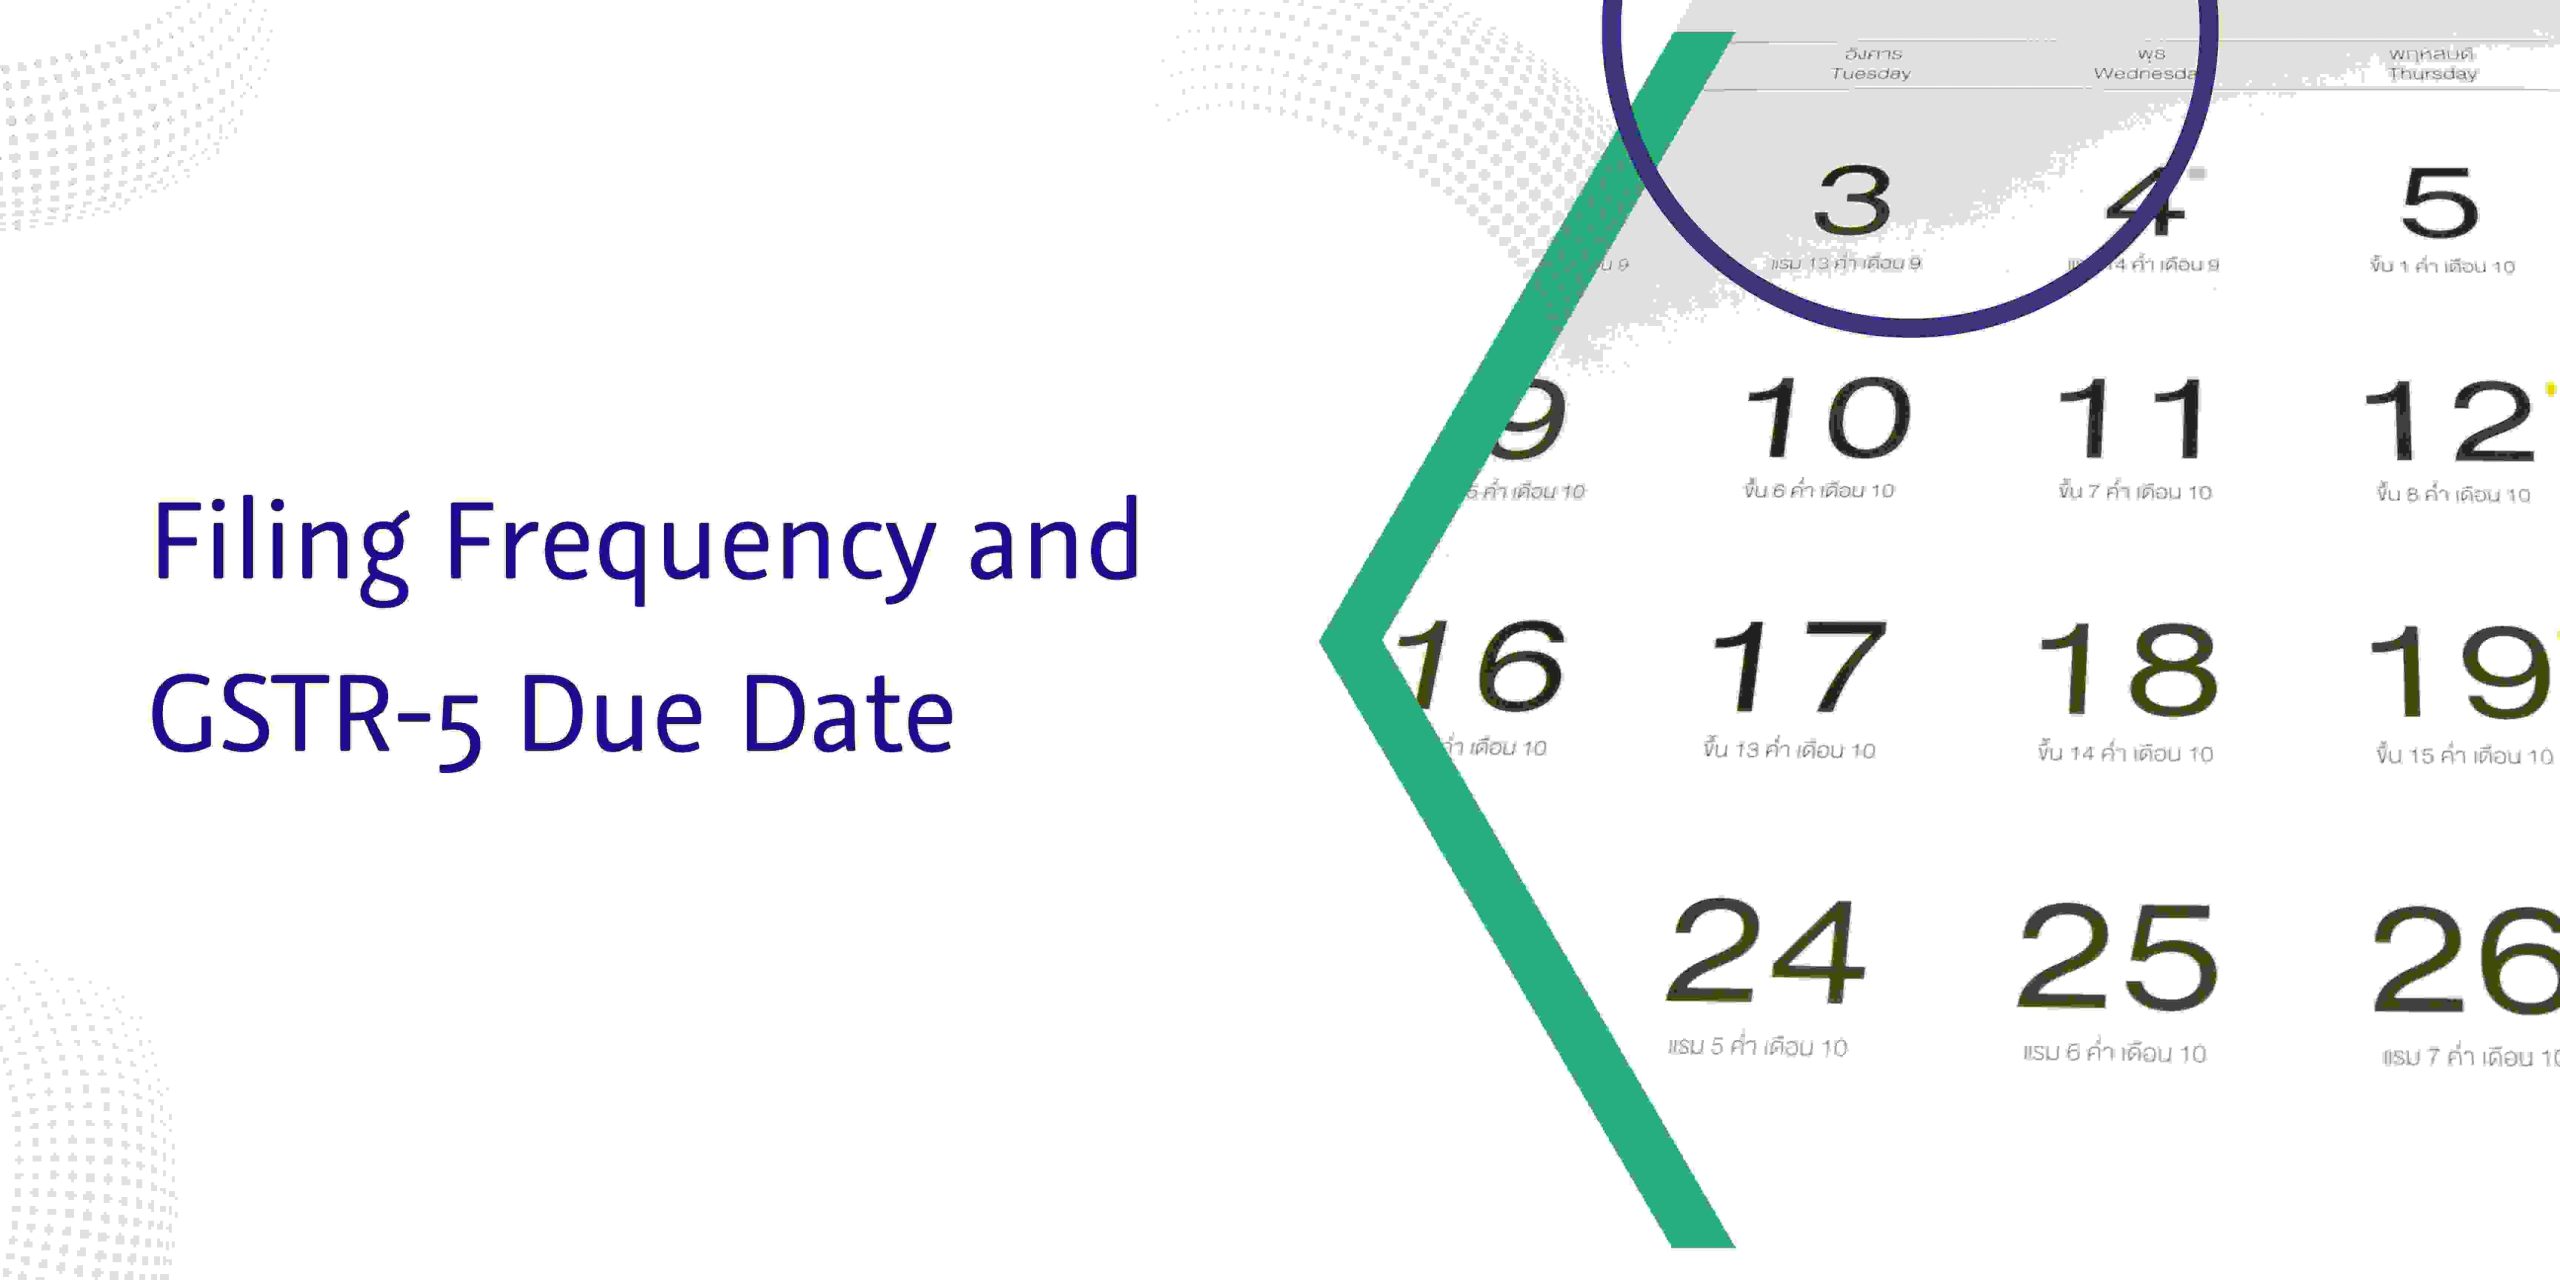 You are currently viewing Filing Frequency and Due Date for GSTR-5